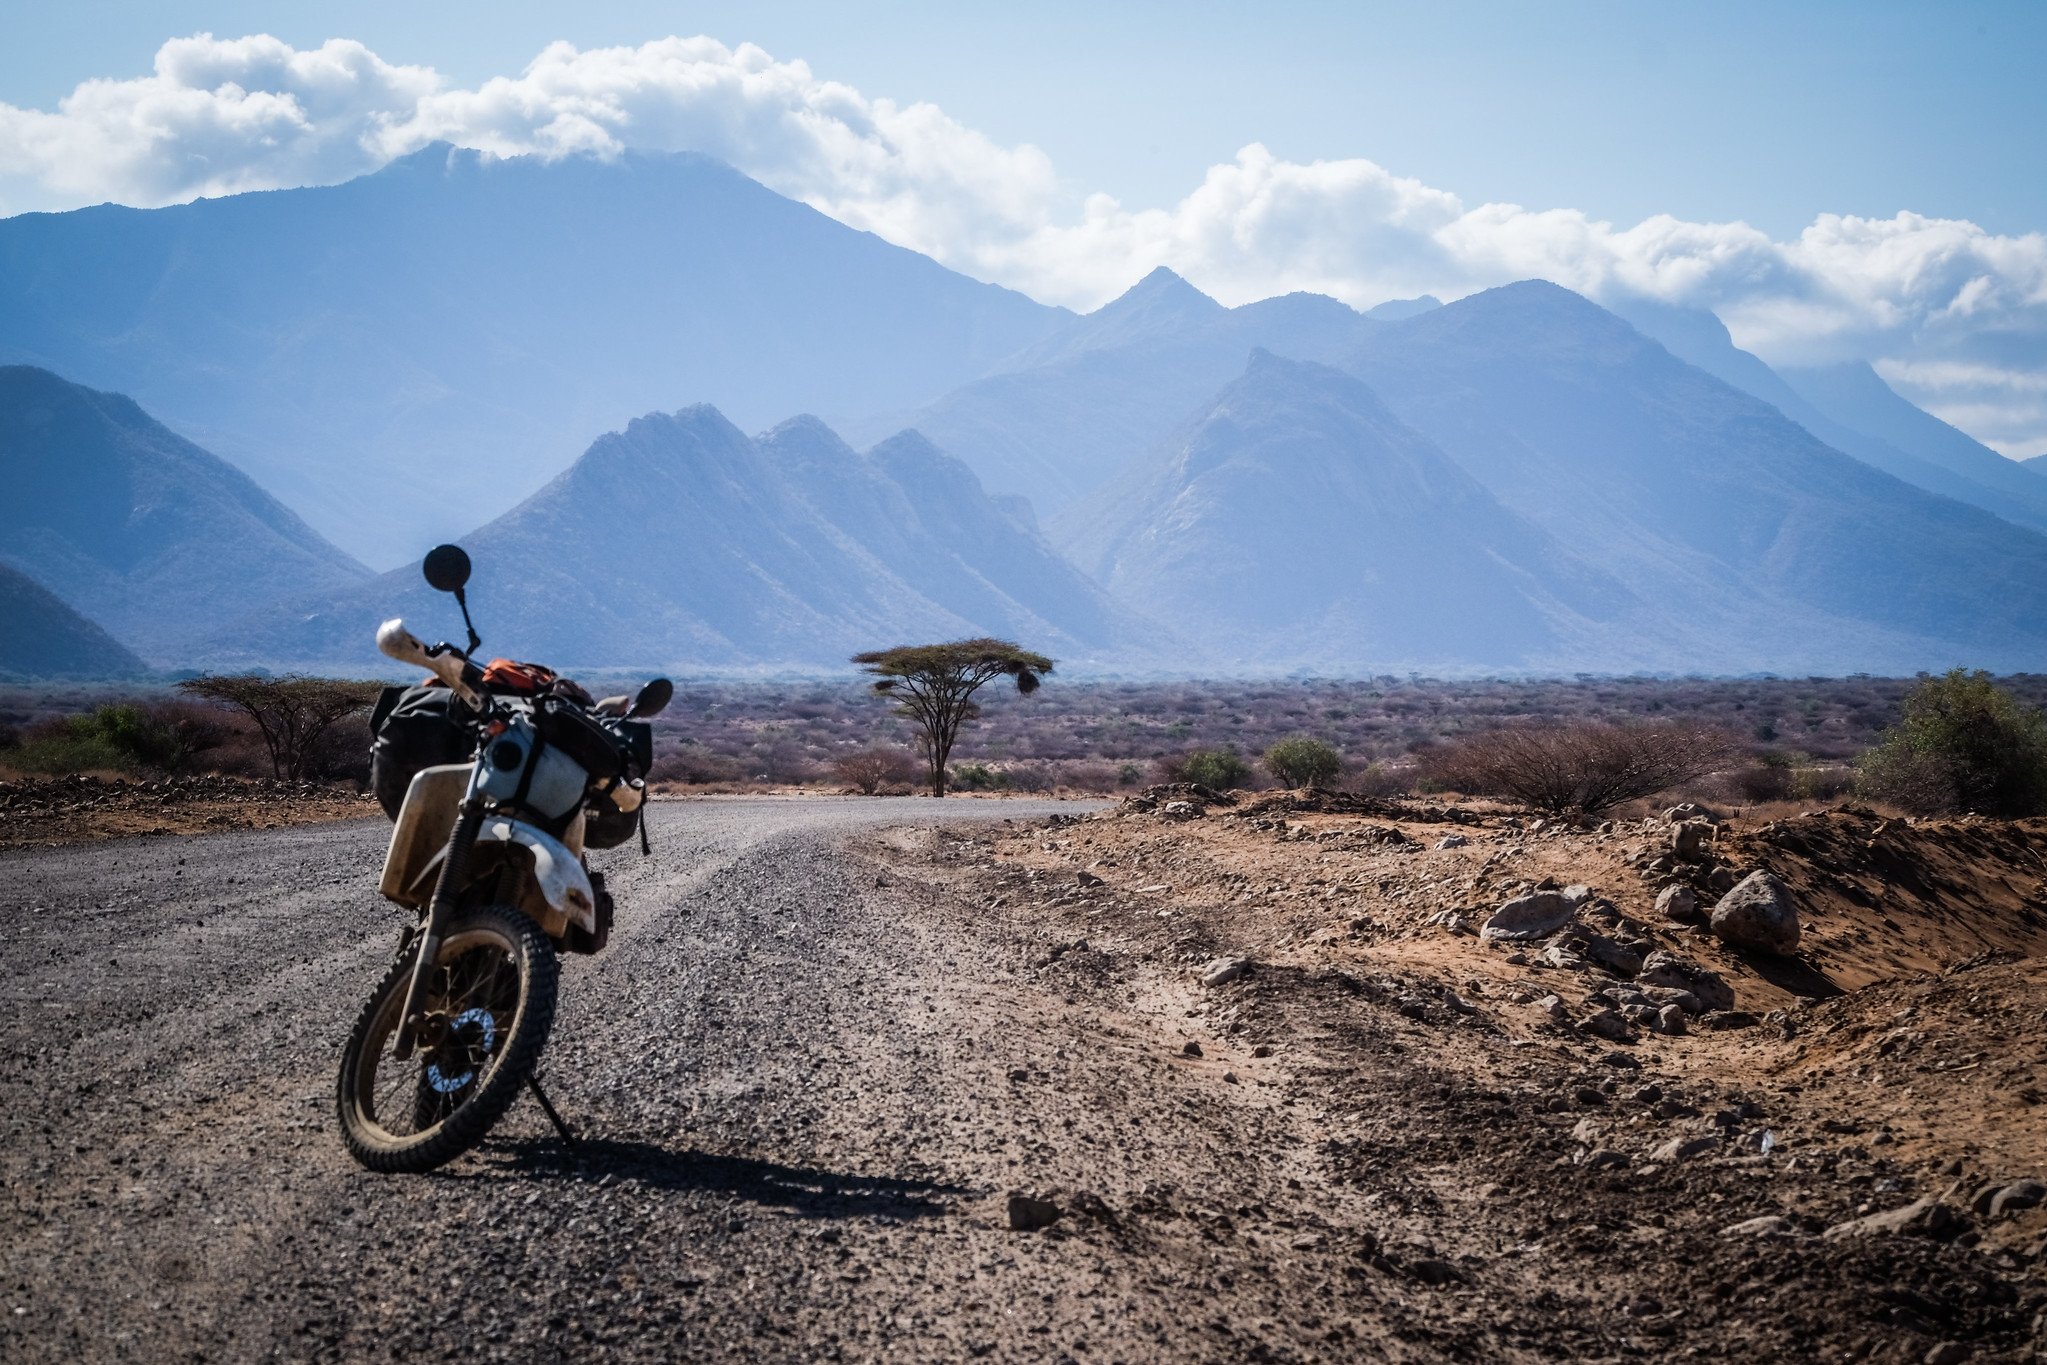  Motorcycle parked on gravel road with mountains in background. 